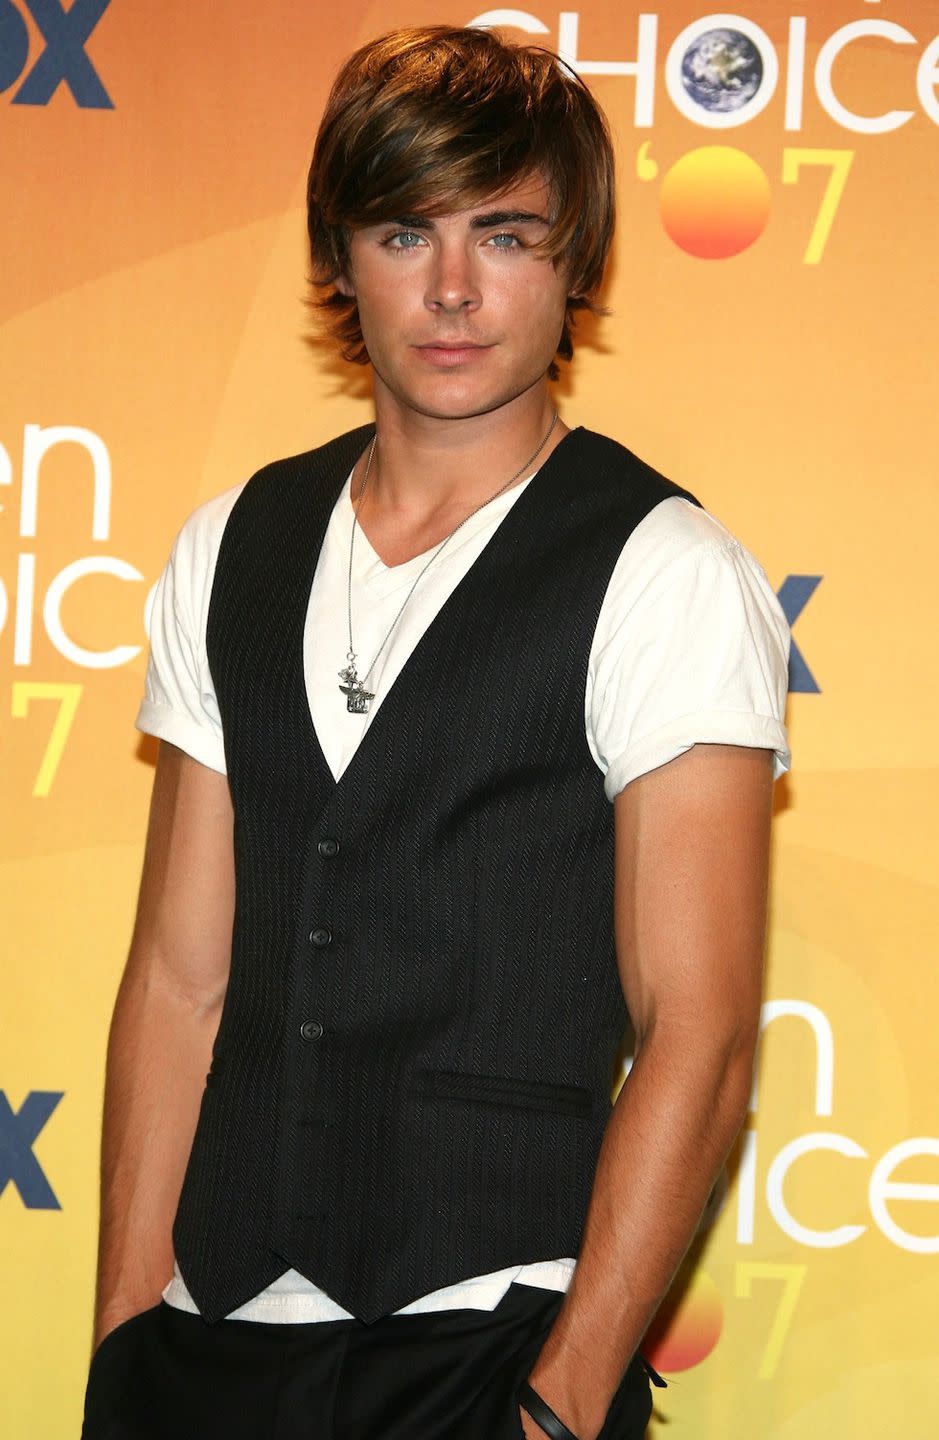 Here's Zac Efron in 2007...